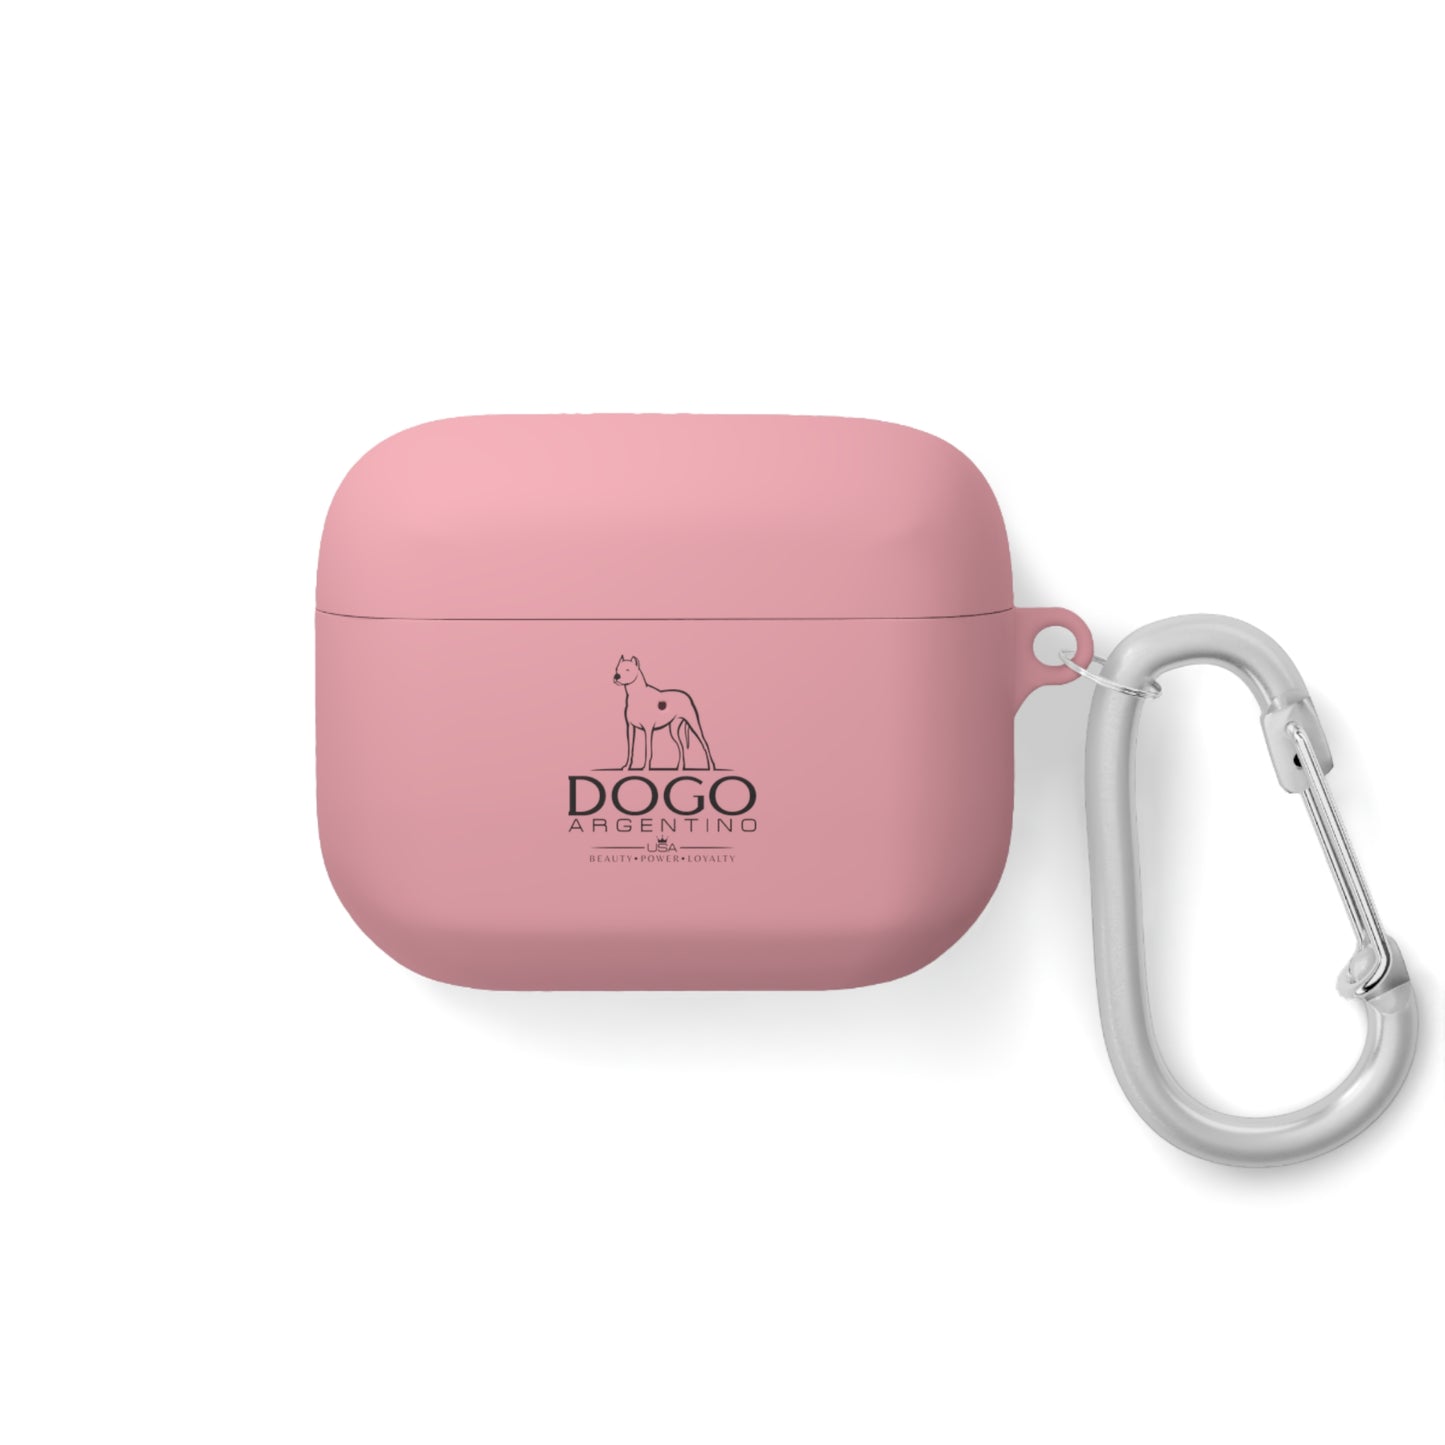 Dogo Argentino Beauty Power Loyalty AirPods and AirPods Pro Case Cover